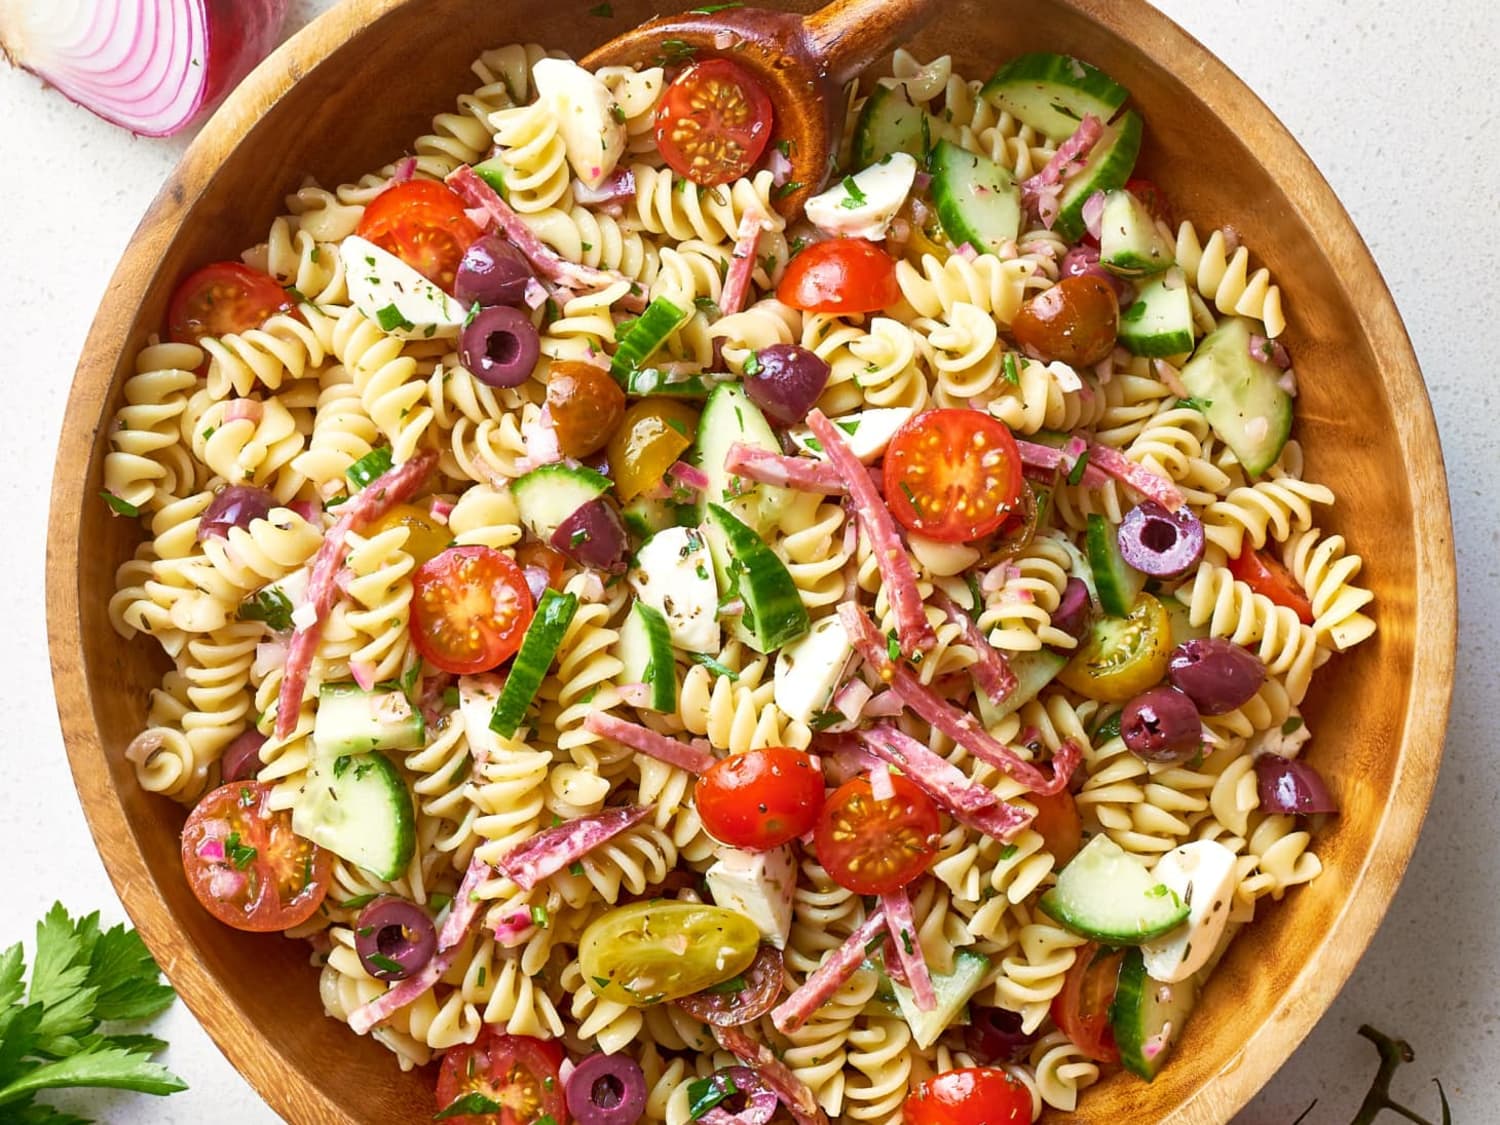 Make a tasty, easy pasta salad for your Memorial Day Weekend